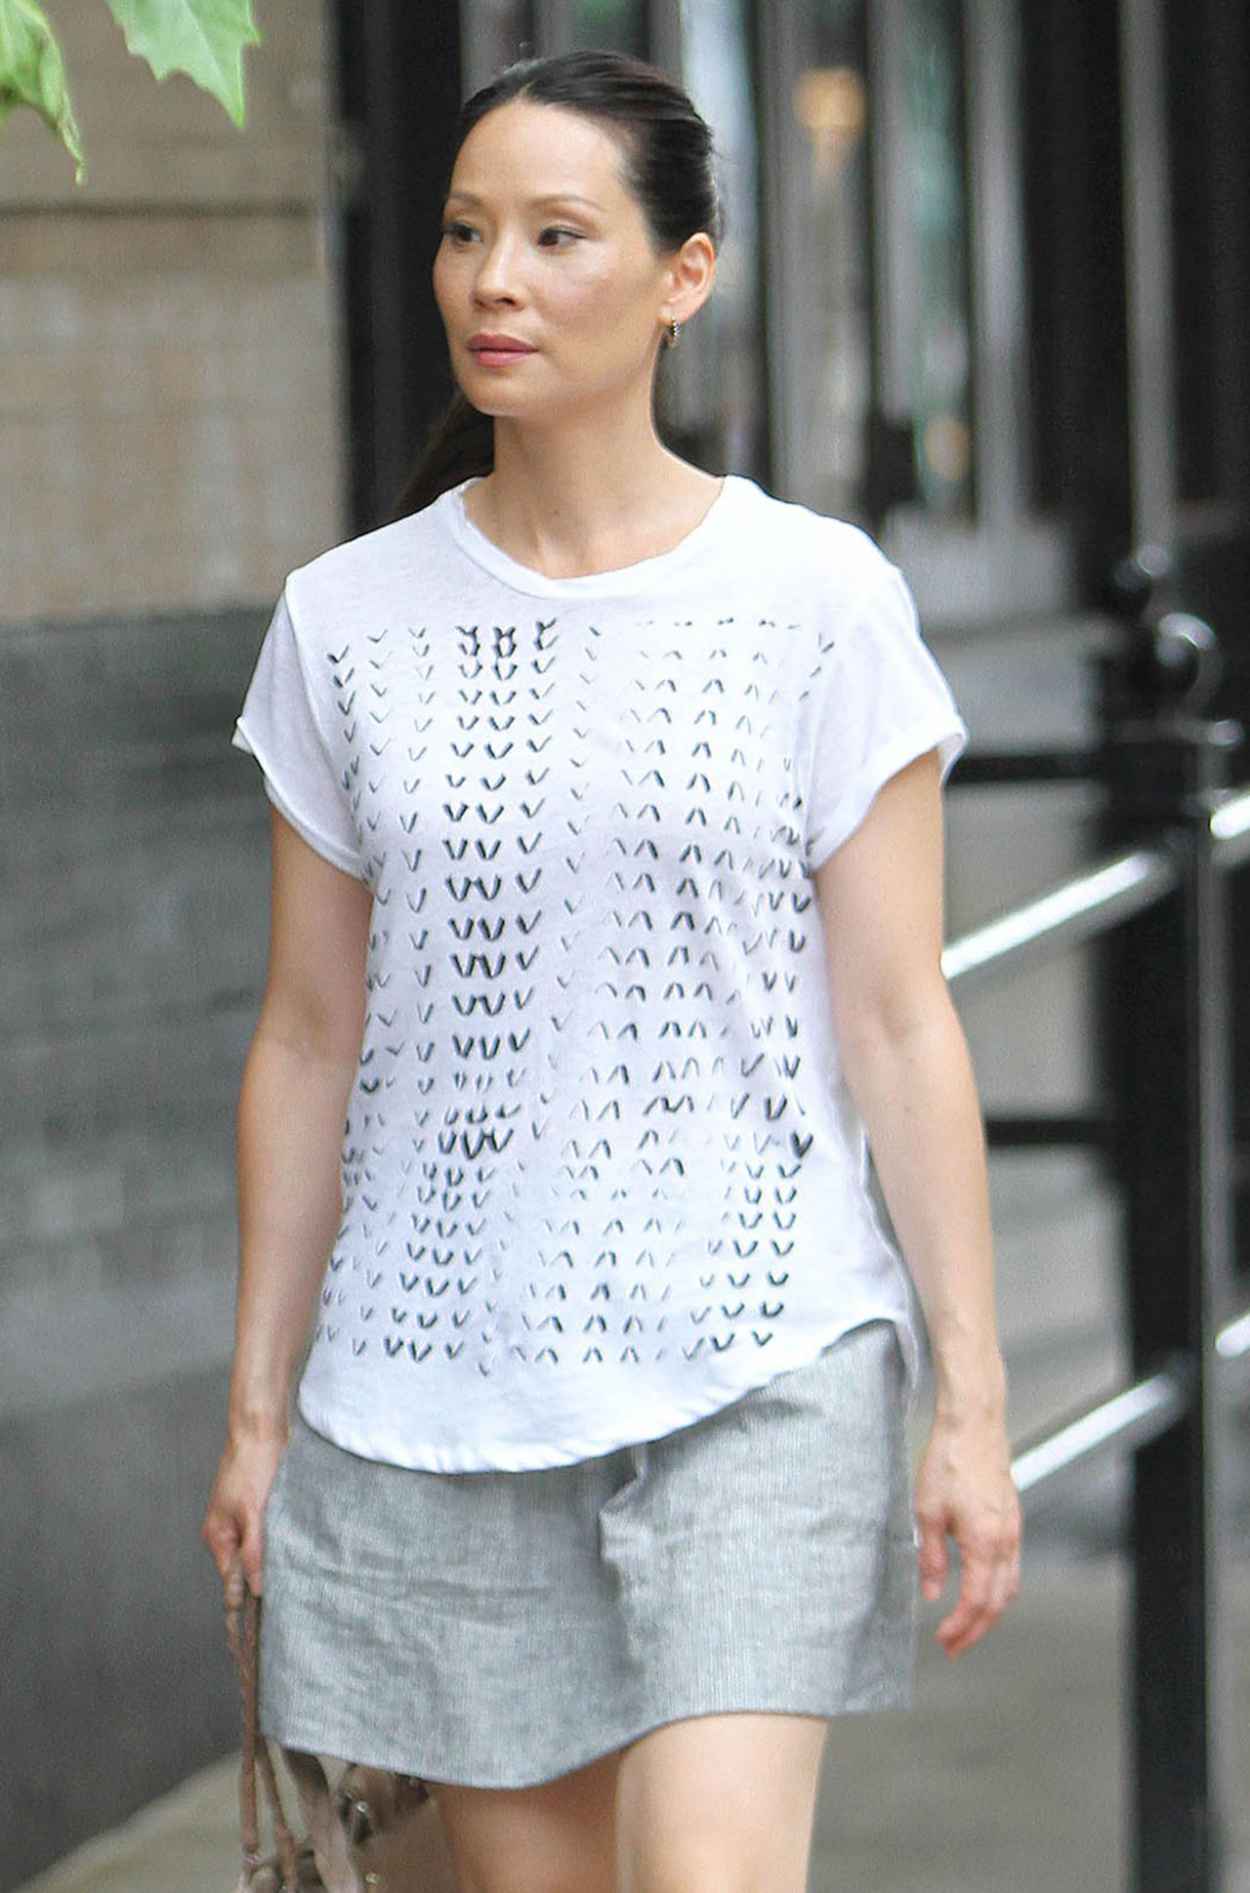 lucy-liu-casual-style-out-in-new-york-city-july-2014_6.jpg